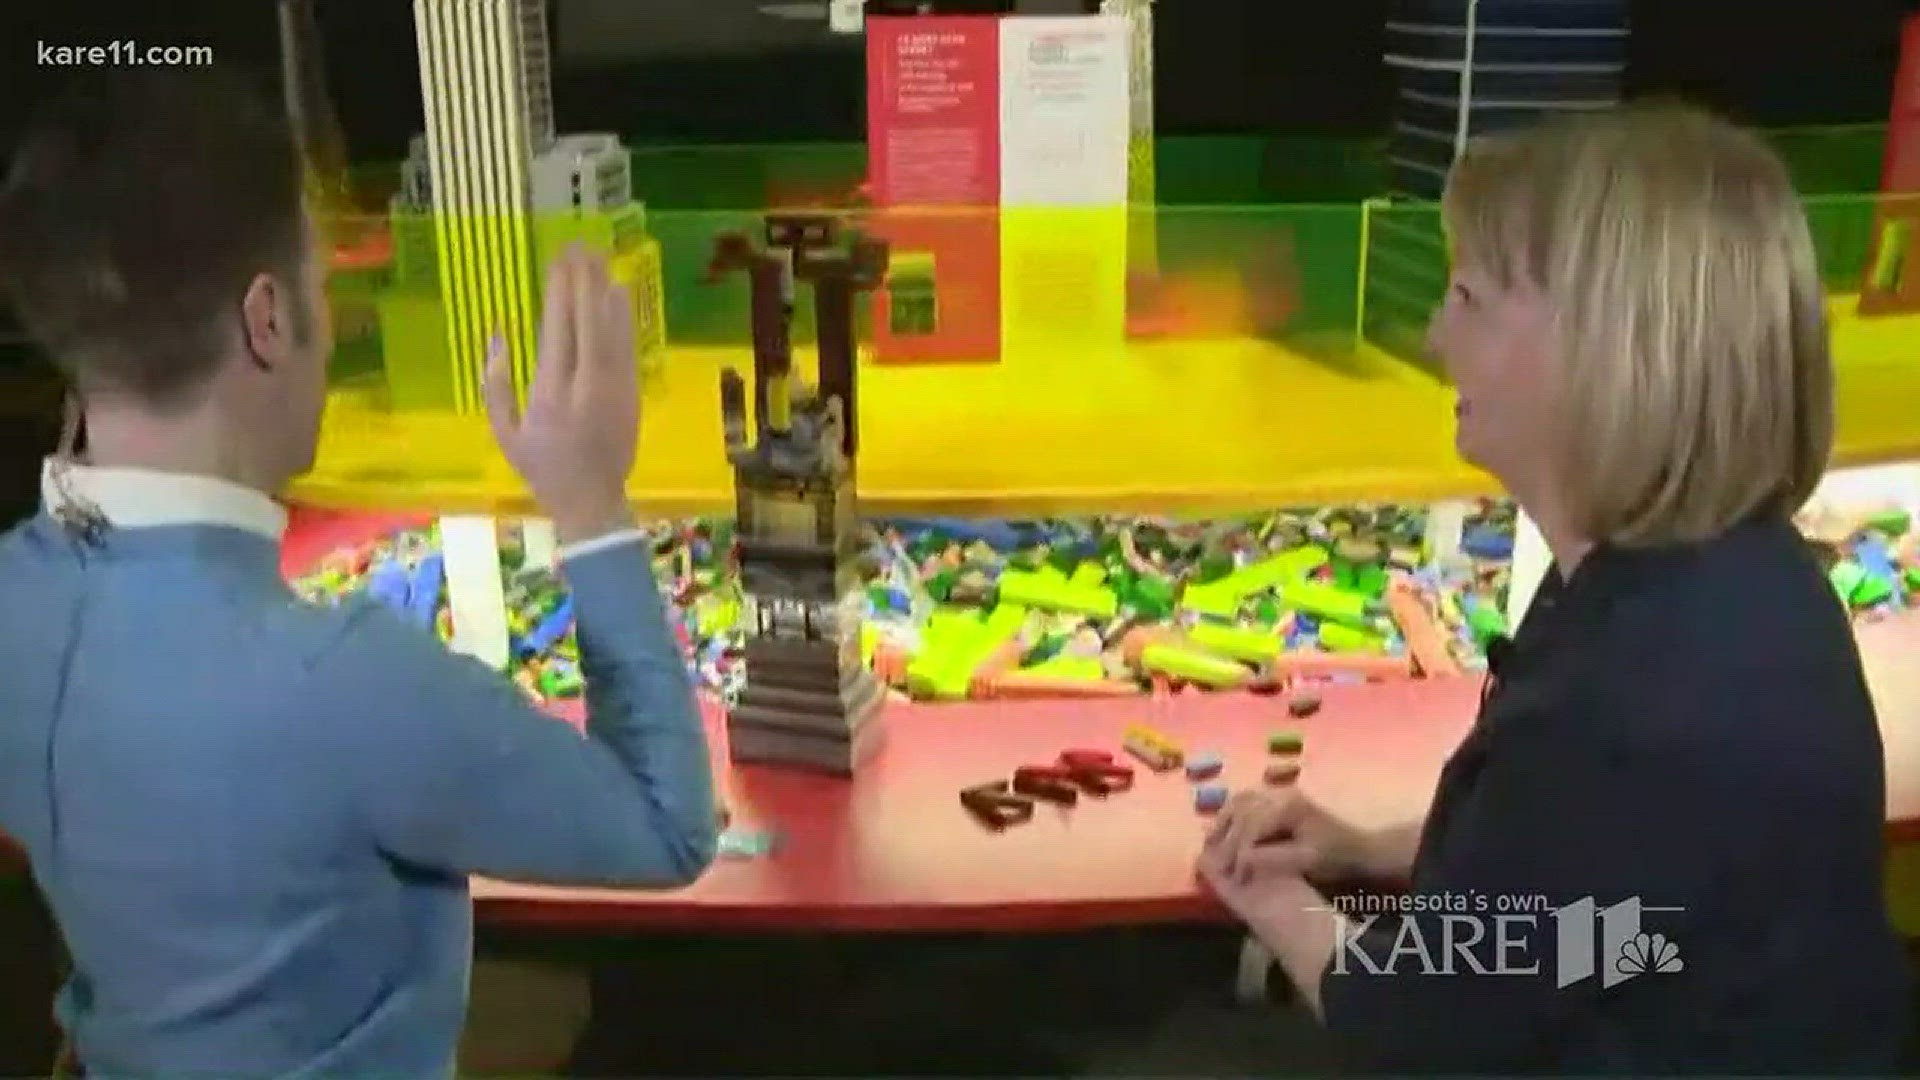 The exhibit, called Towers of Tomorrow with LEGO bricks, features replicas of 20 skyscrapers from around the world. http://kare11.tv/2HA3S4V